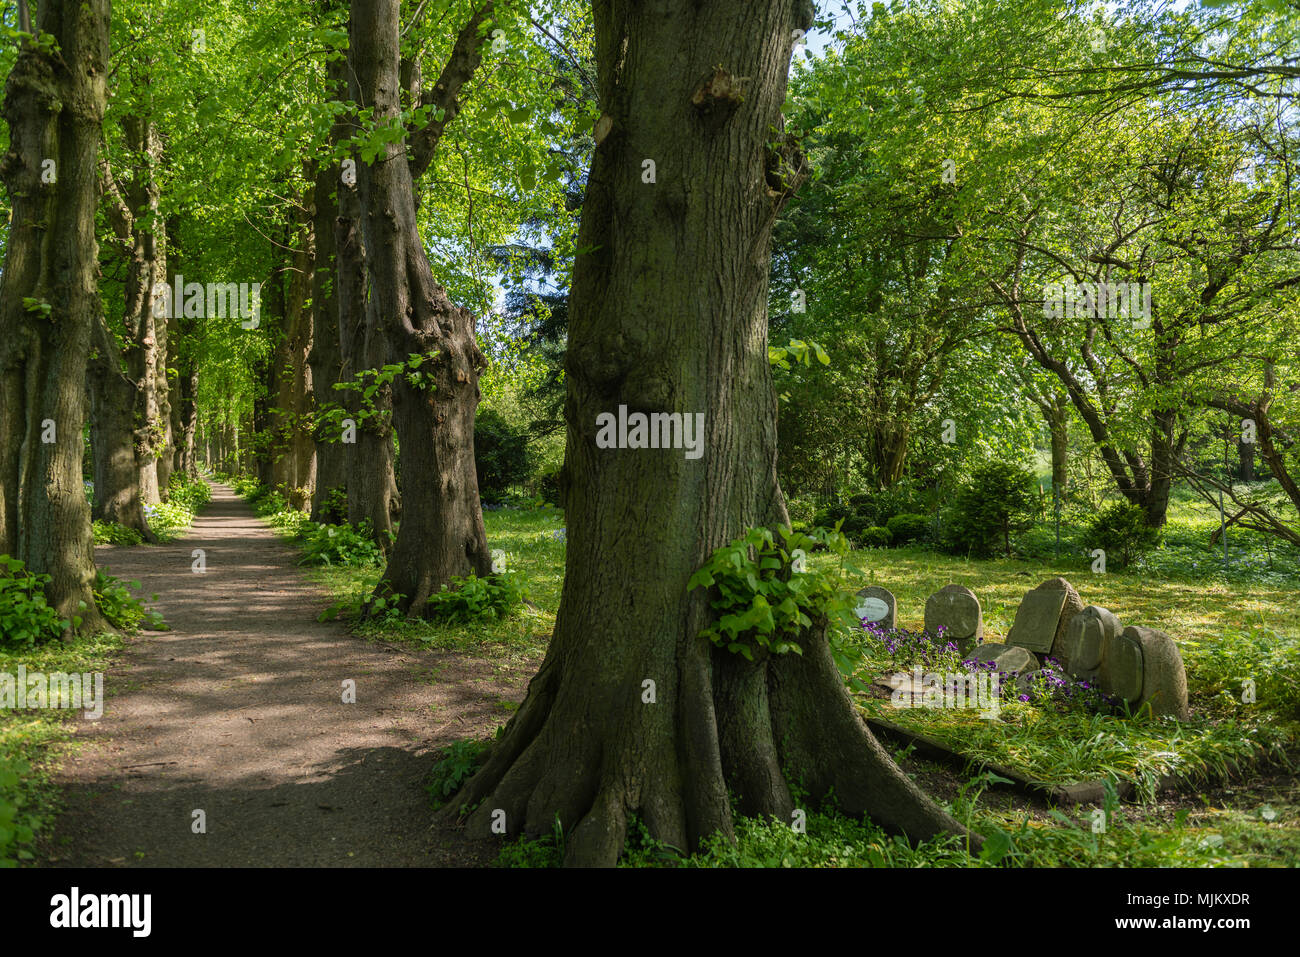 Alley in the cemetery of romantic village of Sieseby, community of Thumby, on the Schlei Fjord, Schleswig-Holstein, North Germany, Europe Stock Photo